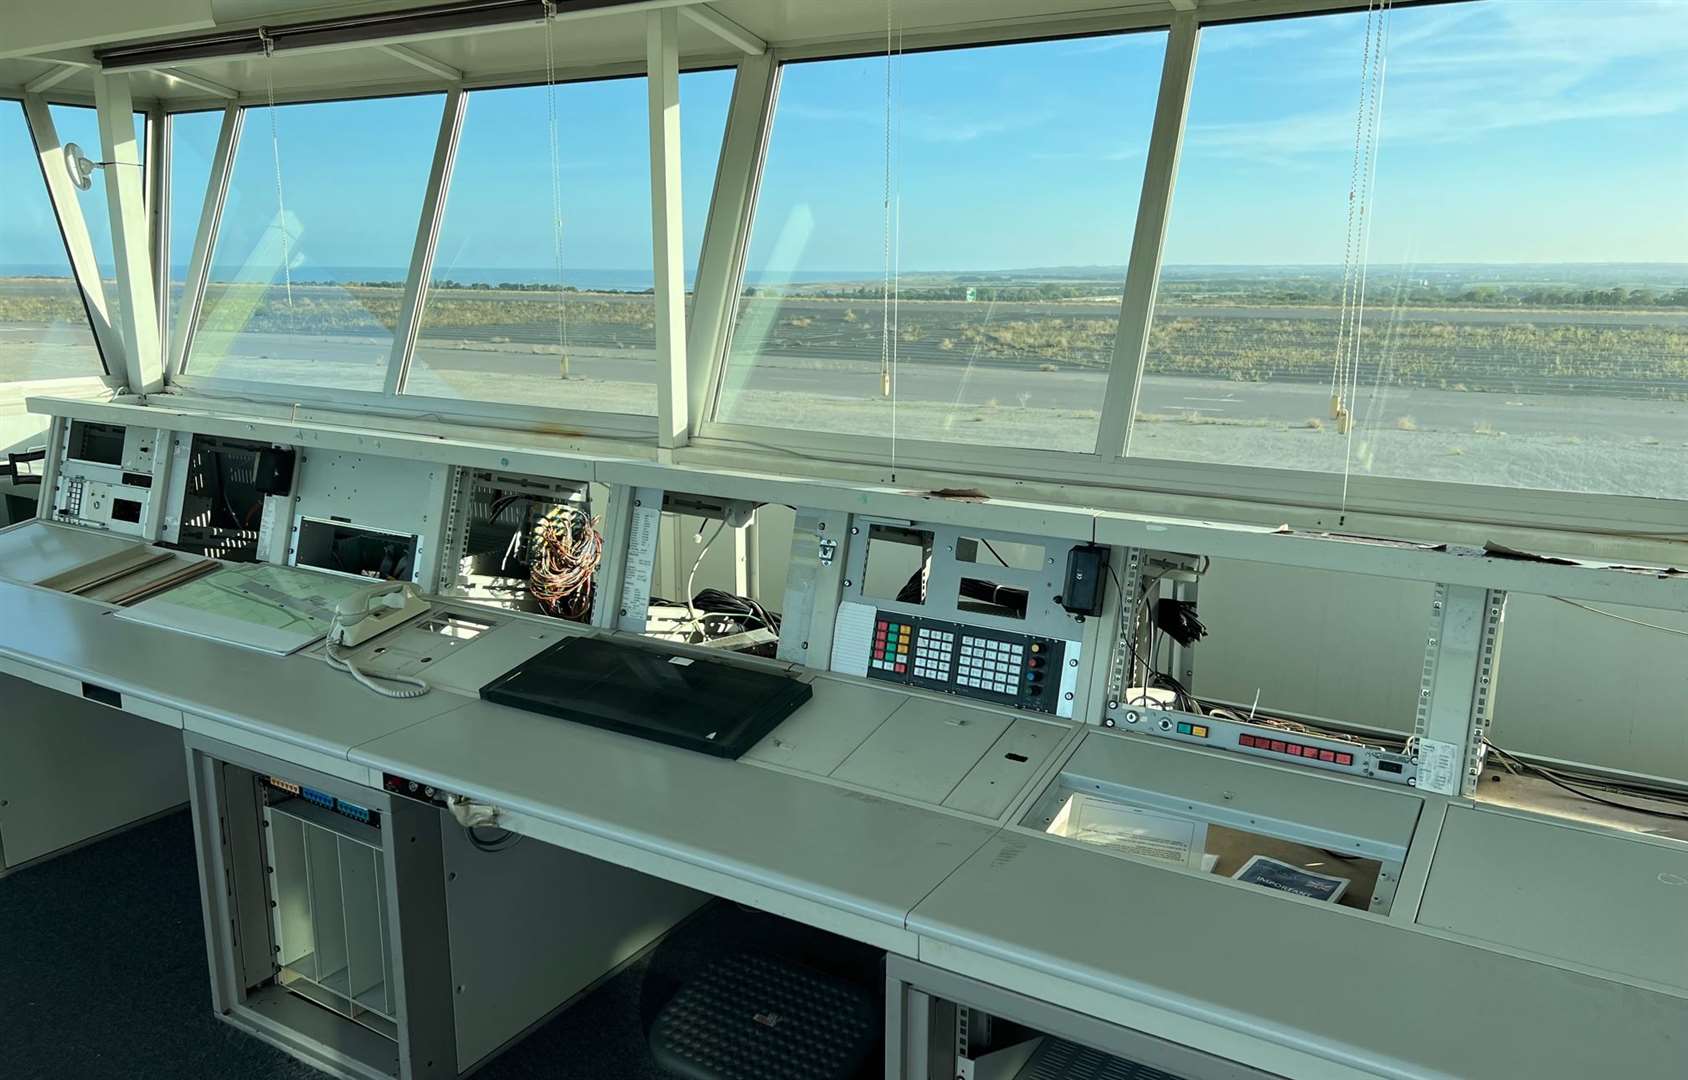 The abandoned desks in the control tower of Manston Airport